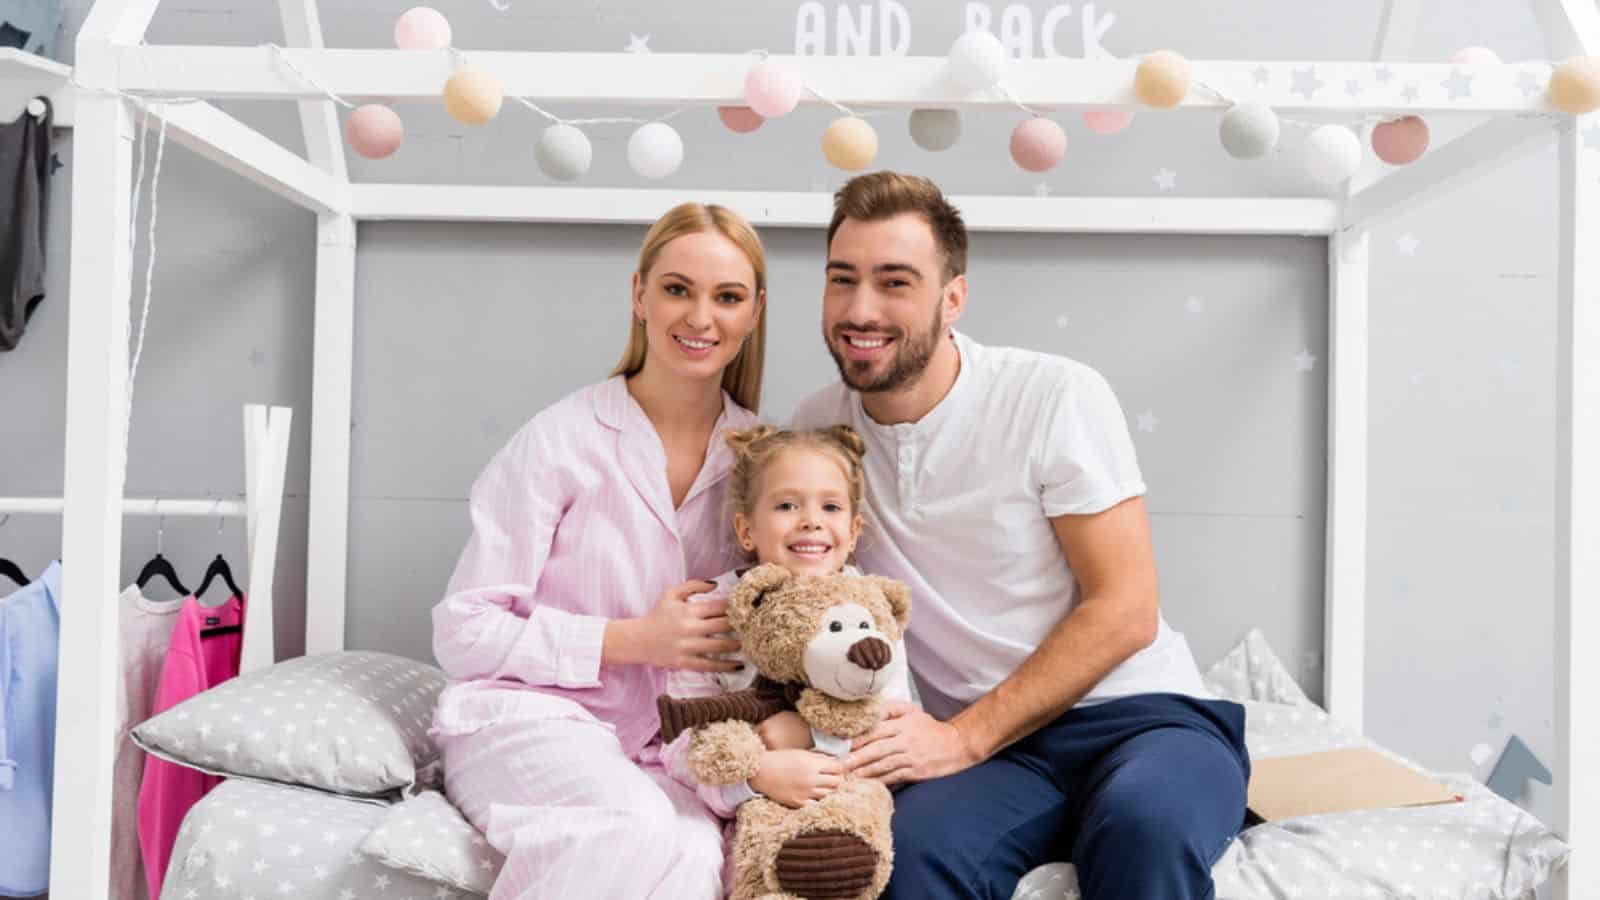 Smiling young family sitting on bed in kid bedroom and looking at camera